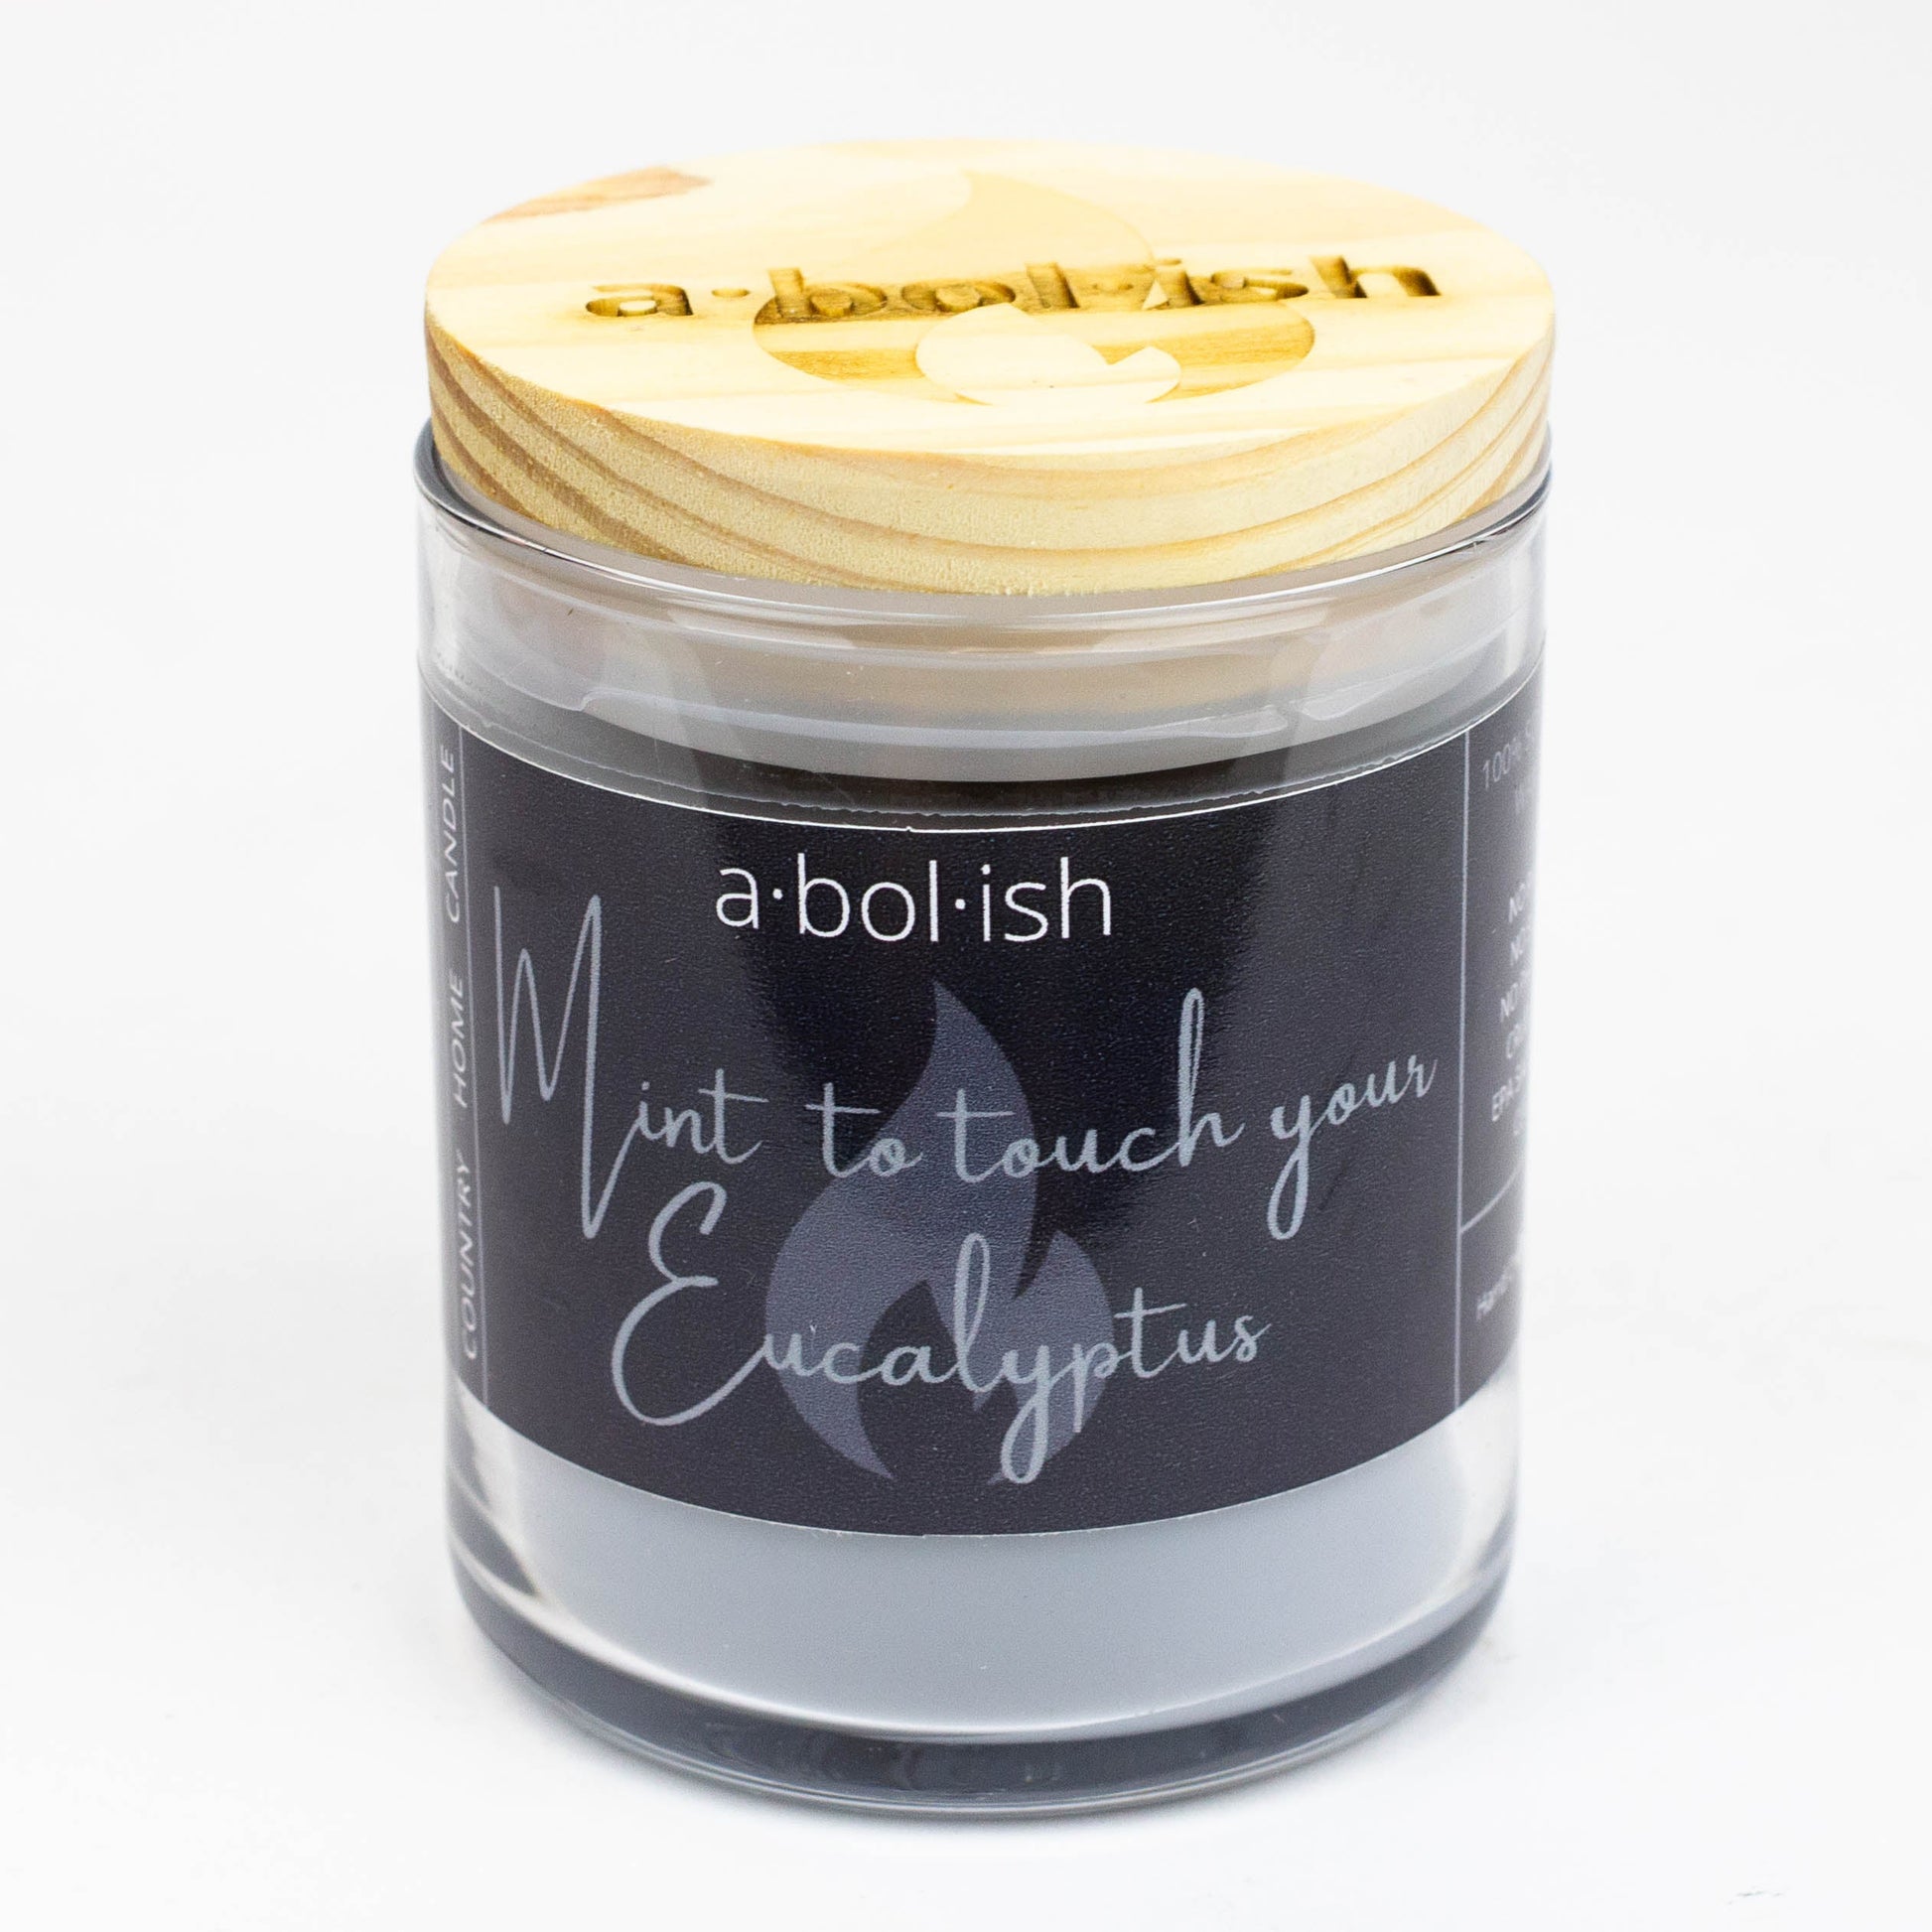 Country Home Candle - a·bol·ish Odor Eliminating Soy Candle_7